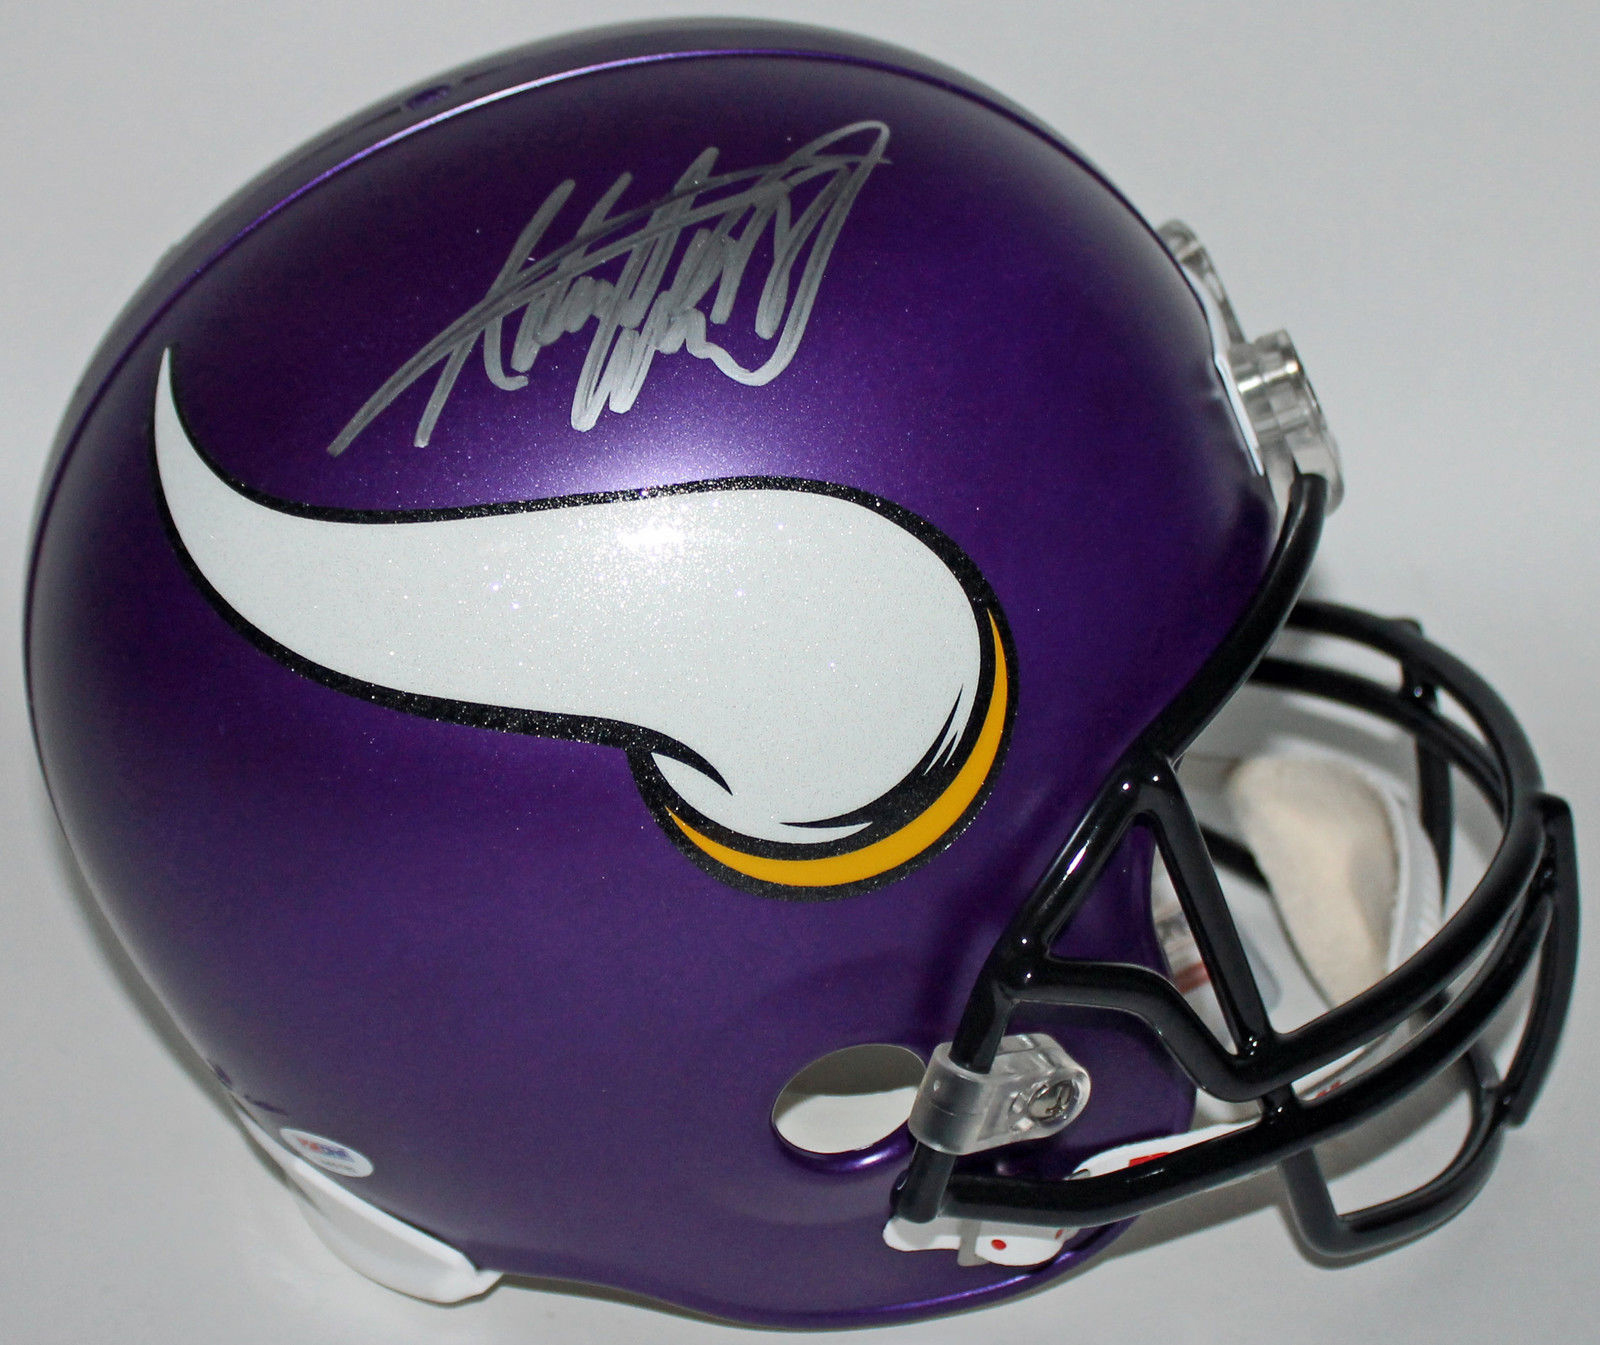 Charity Benefits Unlimited Adrian Peterson helmet - Charity Benefits Unlimited